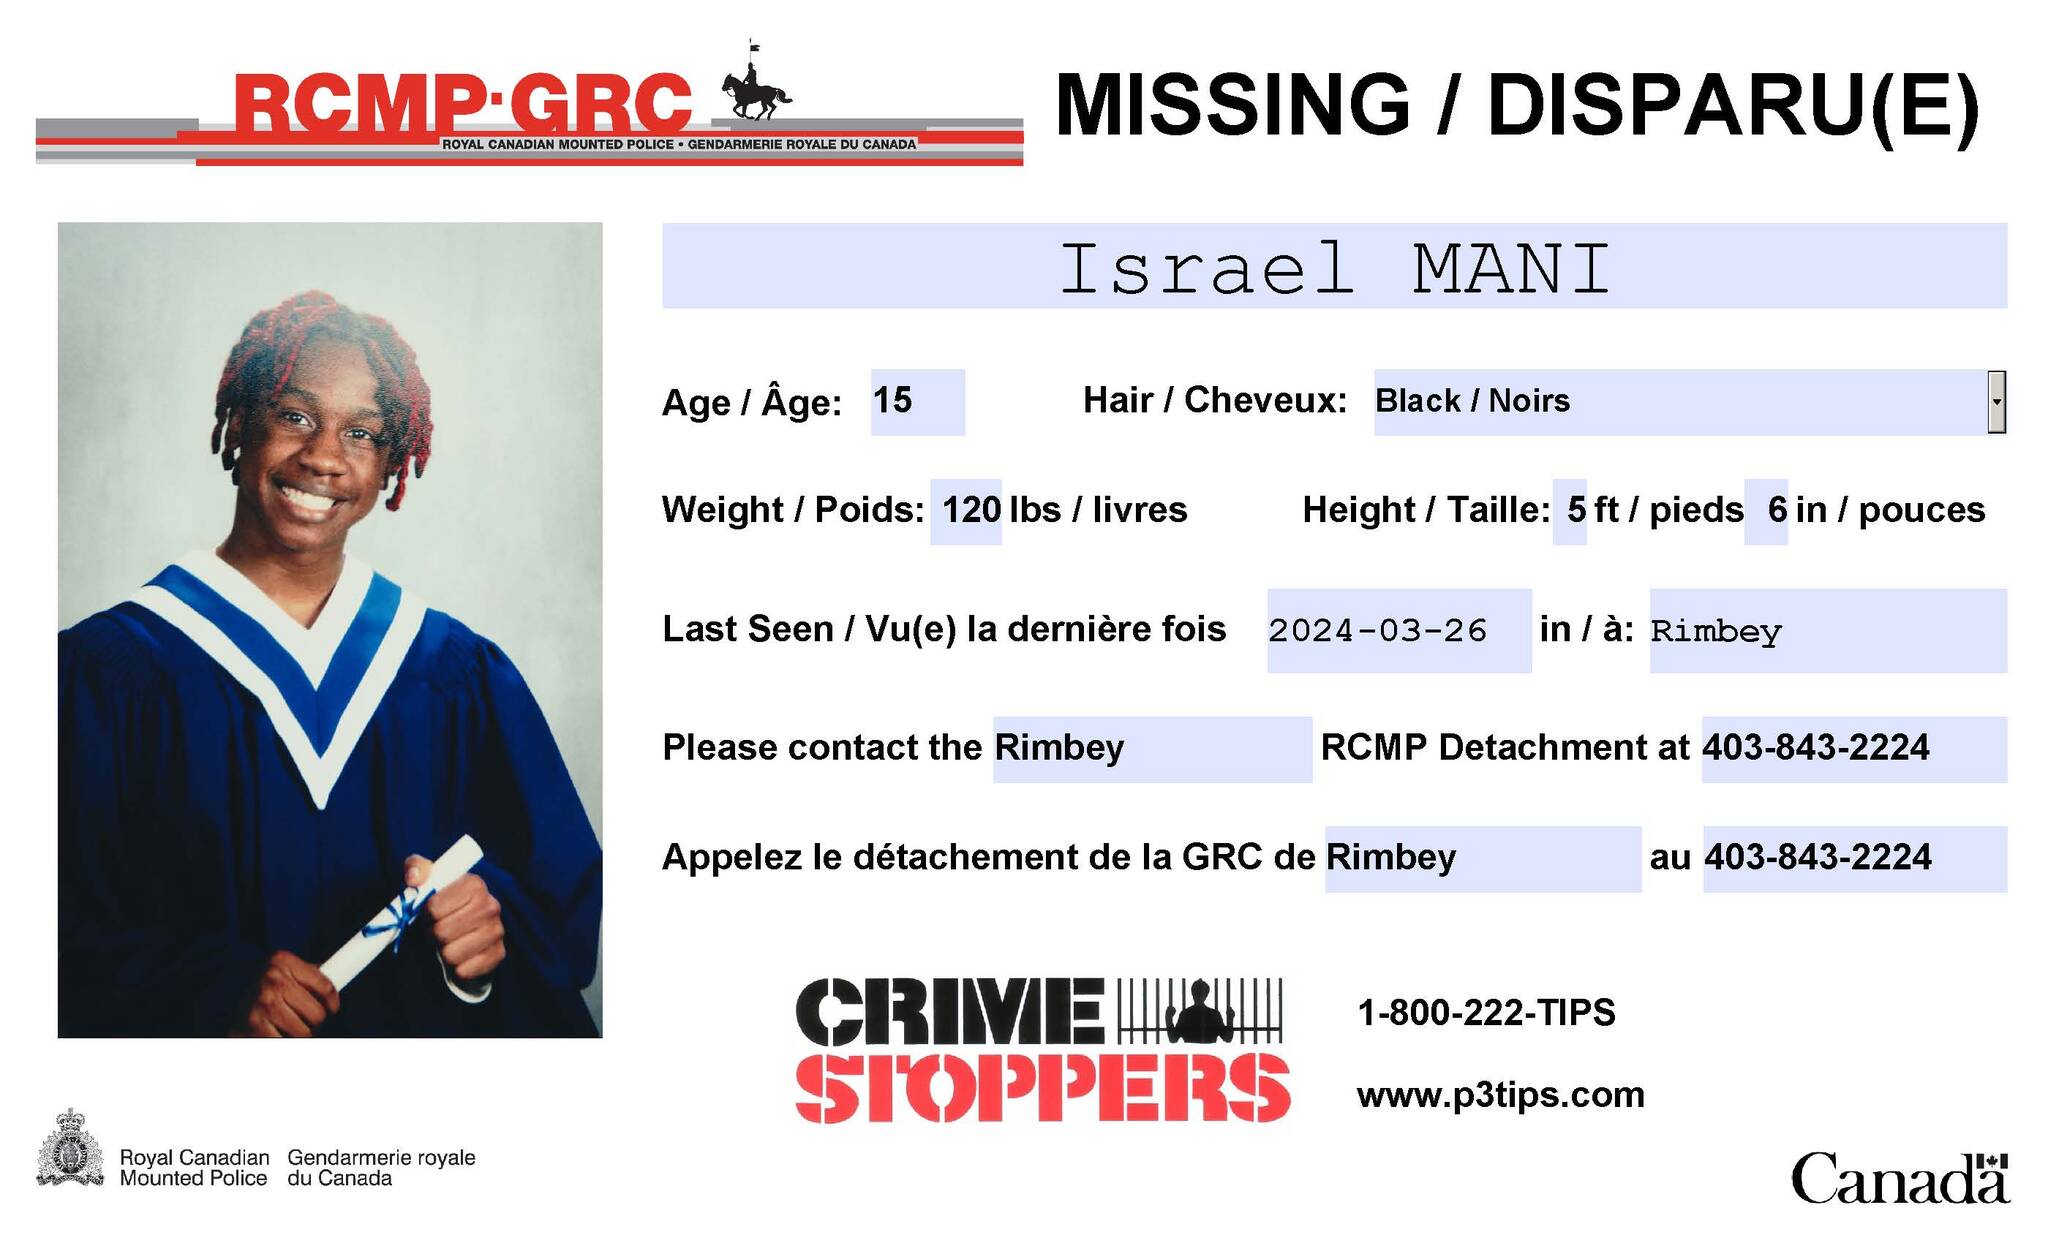 (RCMP missing poster)